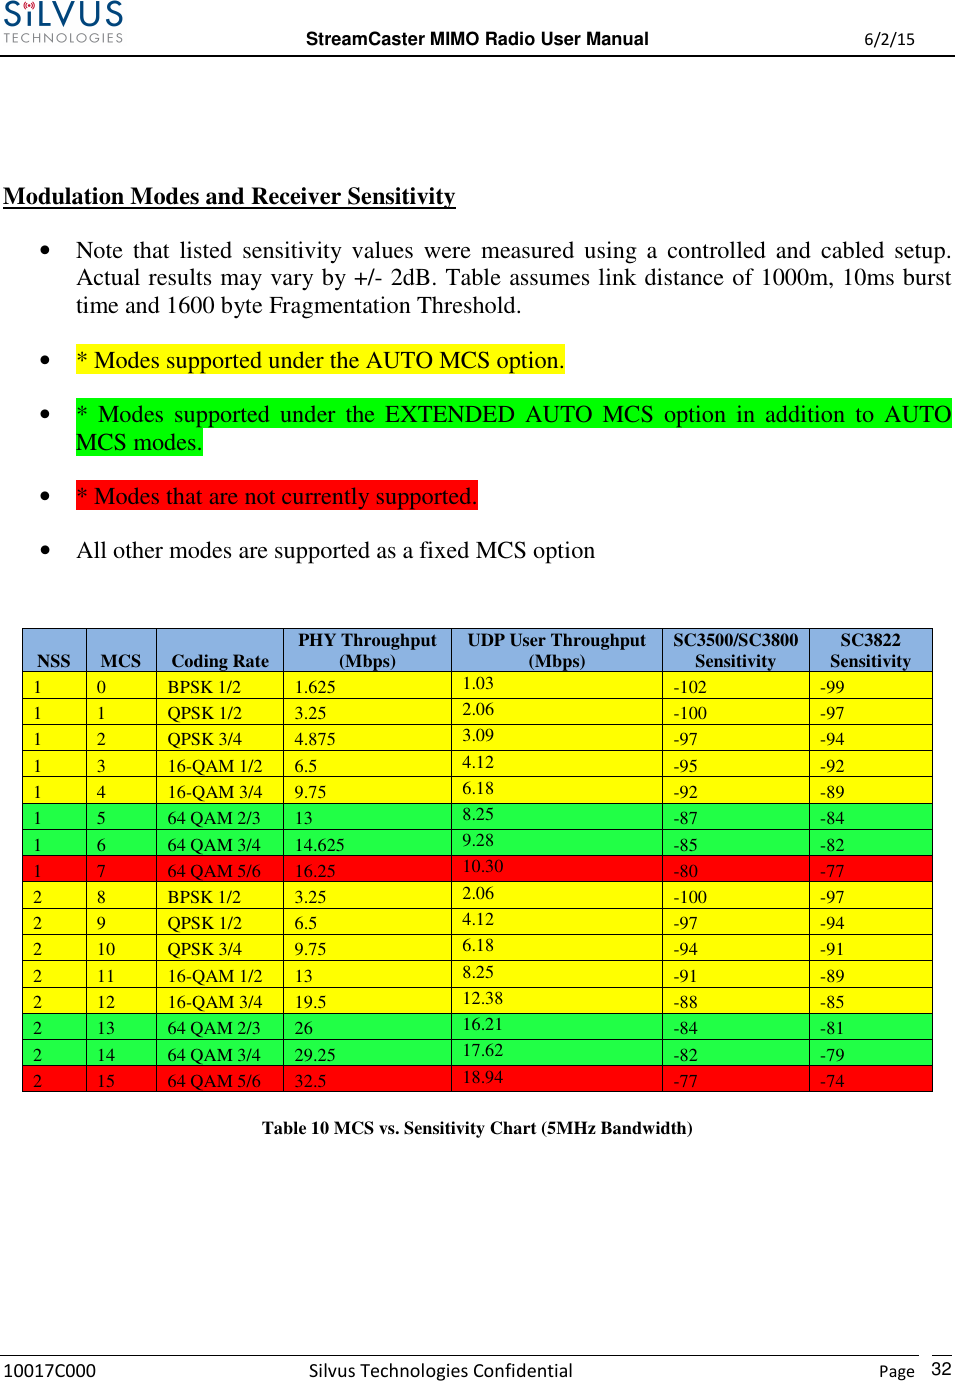  StreamCaster MIMO Radio User Manual  6/2/15 10017C000 Silvus Technologies Confidential    Page   32   Modulation Modes and Receiver Sensitivity • Note  that  listed  sensitivity  values  were  measured  using a  controlled  and  cabled  setup. Actual results may vary by +/- 2dB. Table assumes link distance of 1000m, 10ms burst time and 1600 byte Fragmentation Threshold. • * Modes supported under the AUTO MCS option. • *  Modes  supported  under  the  EXTENDED  AUTO  MCS  option  in  addition  to  AUTO MCS modes.  • * Modes that are not currently supported. • All other modes are supported as a fixed MCS option  NSS  MCS  Coding Rate  PHY Throughput (Mbps)  UDP User Throughput  (Mbps)  SC3500/SC3800 Sensitivity  SC3822 Sensitivity 1  0  BPSK 1/2  1.625  1.03  -102  -99 1  1  QPSK 1/2  3.25  2.06  -100  -97 1  2  QPSK 3/4  4.875  3.09  -97  -94 1  3  16-QAM 1/2  6.5  4.12  -95  -92 1  4  16-QAM 3/4  9.75  6.18  -92  -89 1  5  64 QAM 2/3  13  8.25  -87  -84 1 6 64 QAM 3/4 14.625 9.28 -85 -82 1 7 64 QAM 5/6 16.25 10.30 -80 -77 2 8 BPSK 1/2 3.25 2.06 -100 -97 2 9 QPSK 1/2 6.5 4.12 -97 -94 2  10  QPSK 3/4  9.75  6.18  -94  -91 2  11  16-QAM 1/2  13  8.25  -91  -89 2  12  16-QAM 3/4  19.5  12.38  -88  -85 2  13  64 QAM 2/3  26  16.21  -84  -81 2 14 64 QAM 3/4 29.25 17.62 -82 -79 2 15 64 QAM 5/6 32.5 18.94 -77 -74 Table 10 MCS vs. Sensitivity Chart (5MHz Bandwidth)     